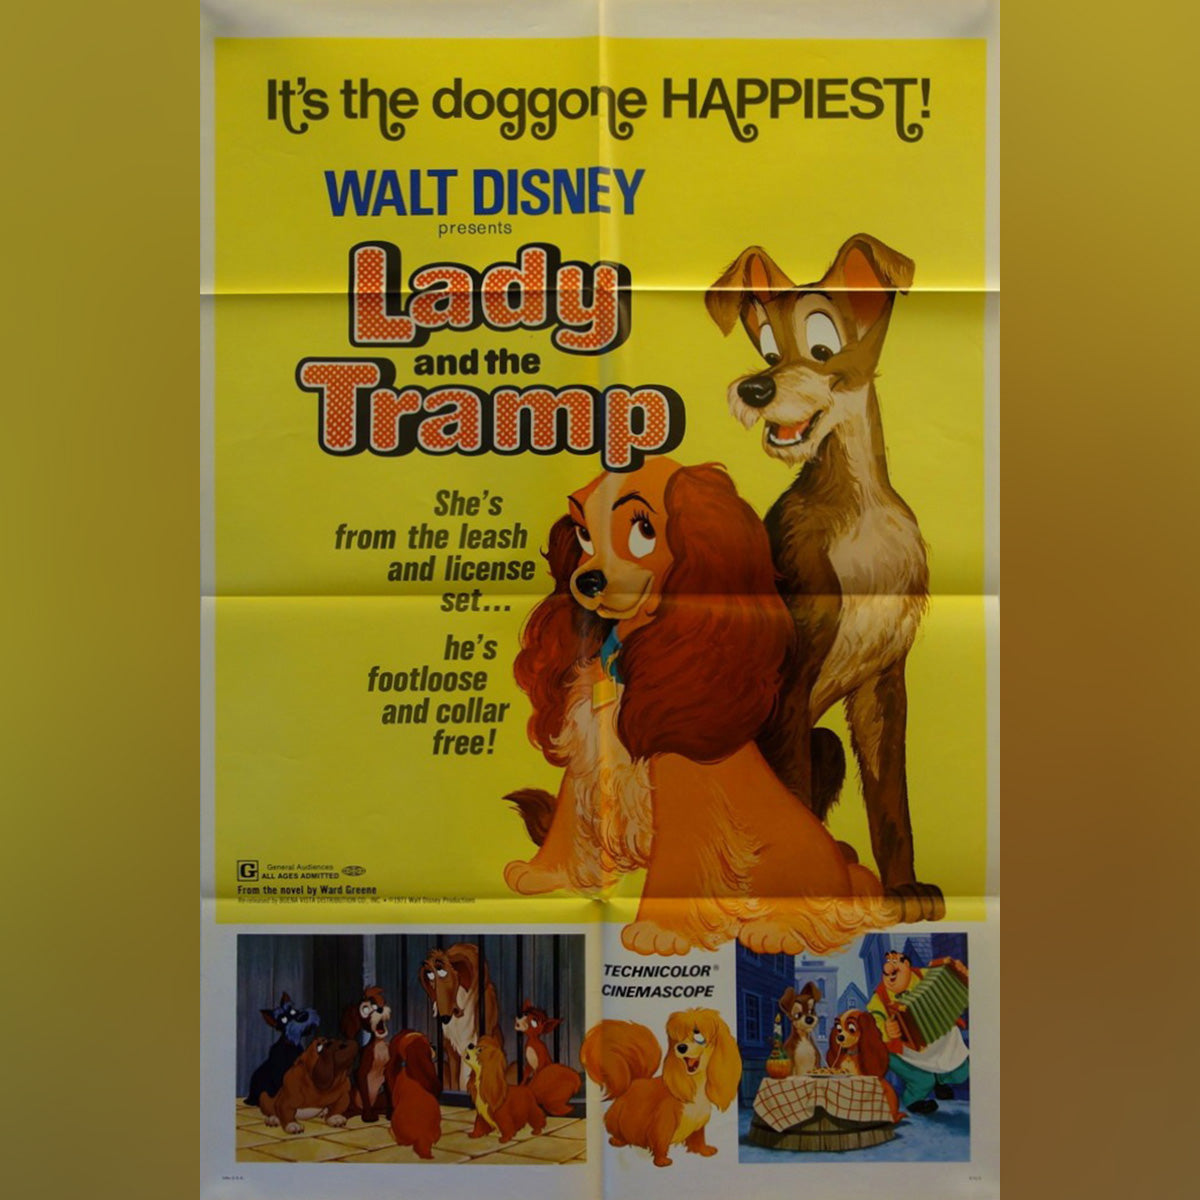 Original Movie Poster of Lady And The Tramp (1972R)